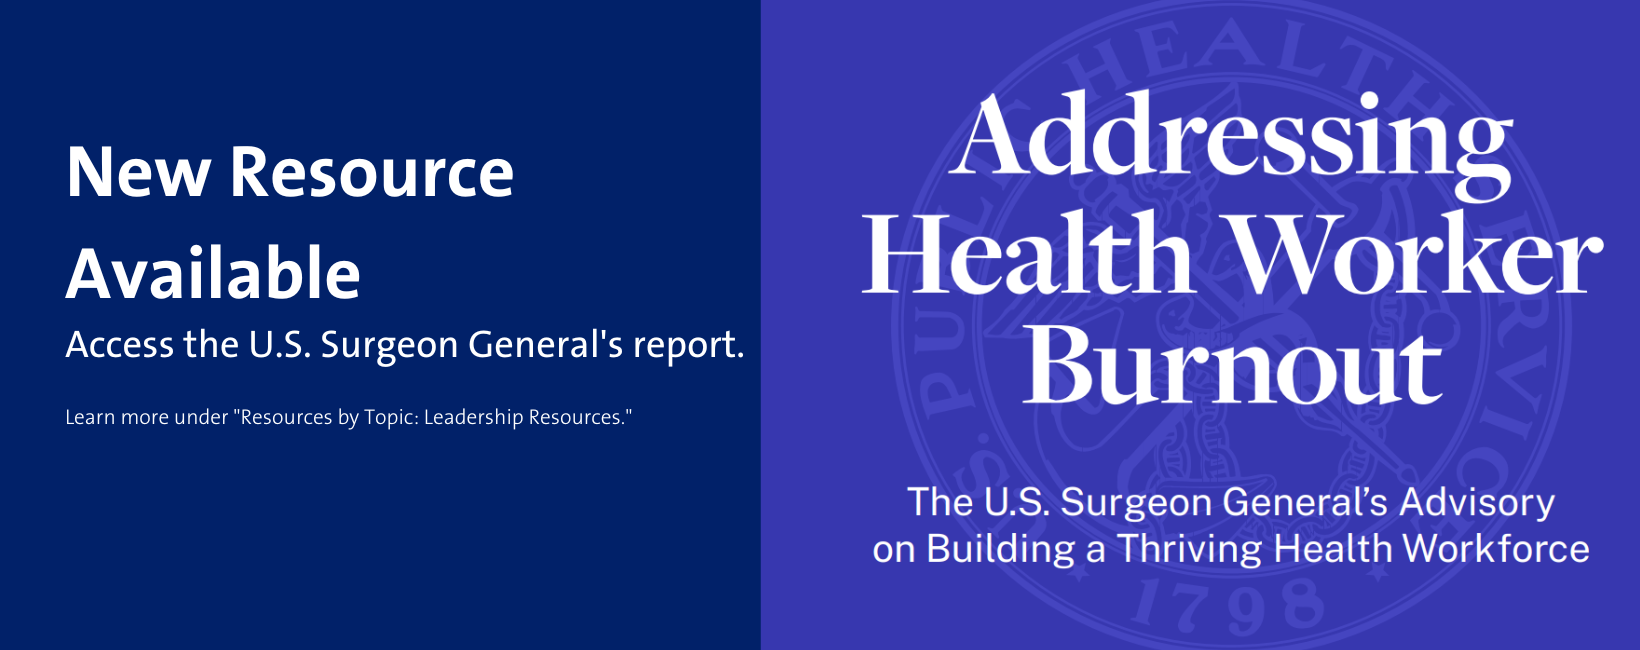 Navy blue background on right with white writing that says "New Resource Available. Access the US Surgeon General's report." Green button beneath says "Learn more." To the right there is a picture of the cover of the Surgeon General's Report: bright blue background with department watermark, and the title of the report: "Addressing Health Worker Burnout- The US Surgeon General's Advisory on Building a Thriving Health Workforce"